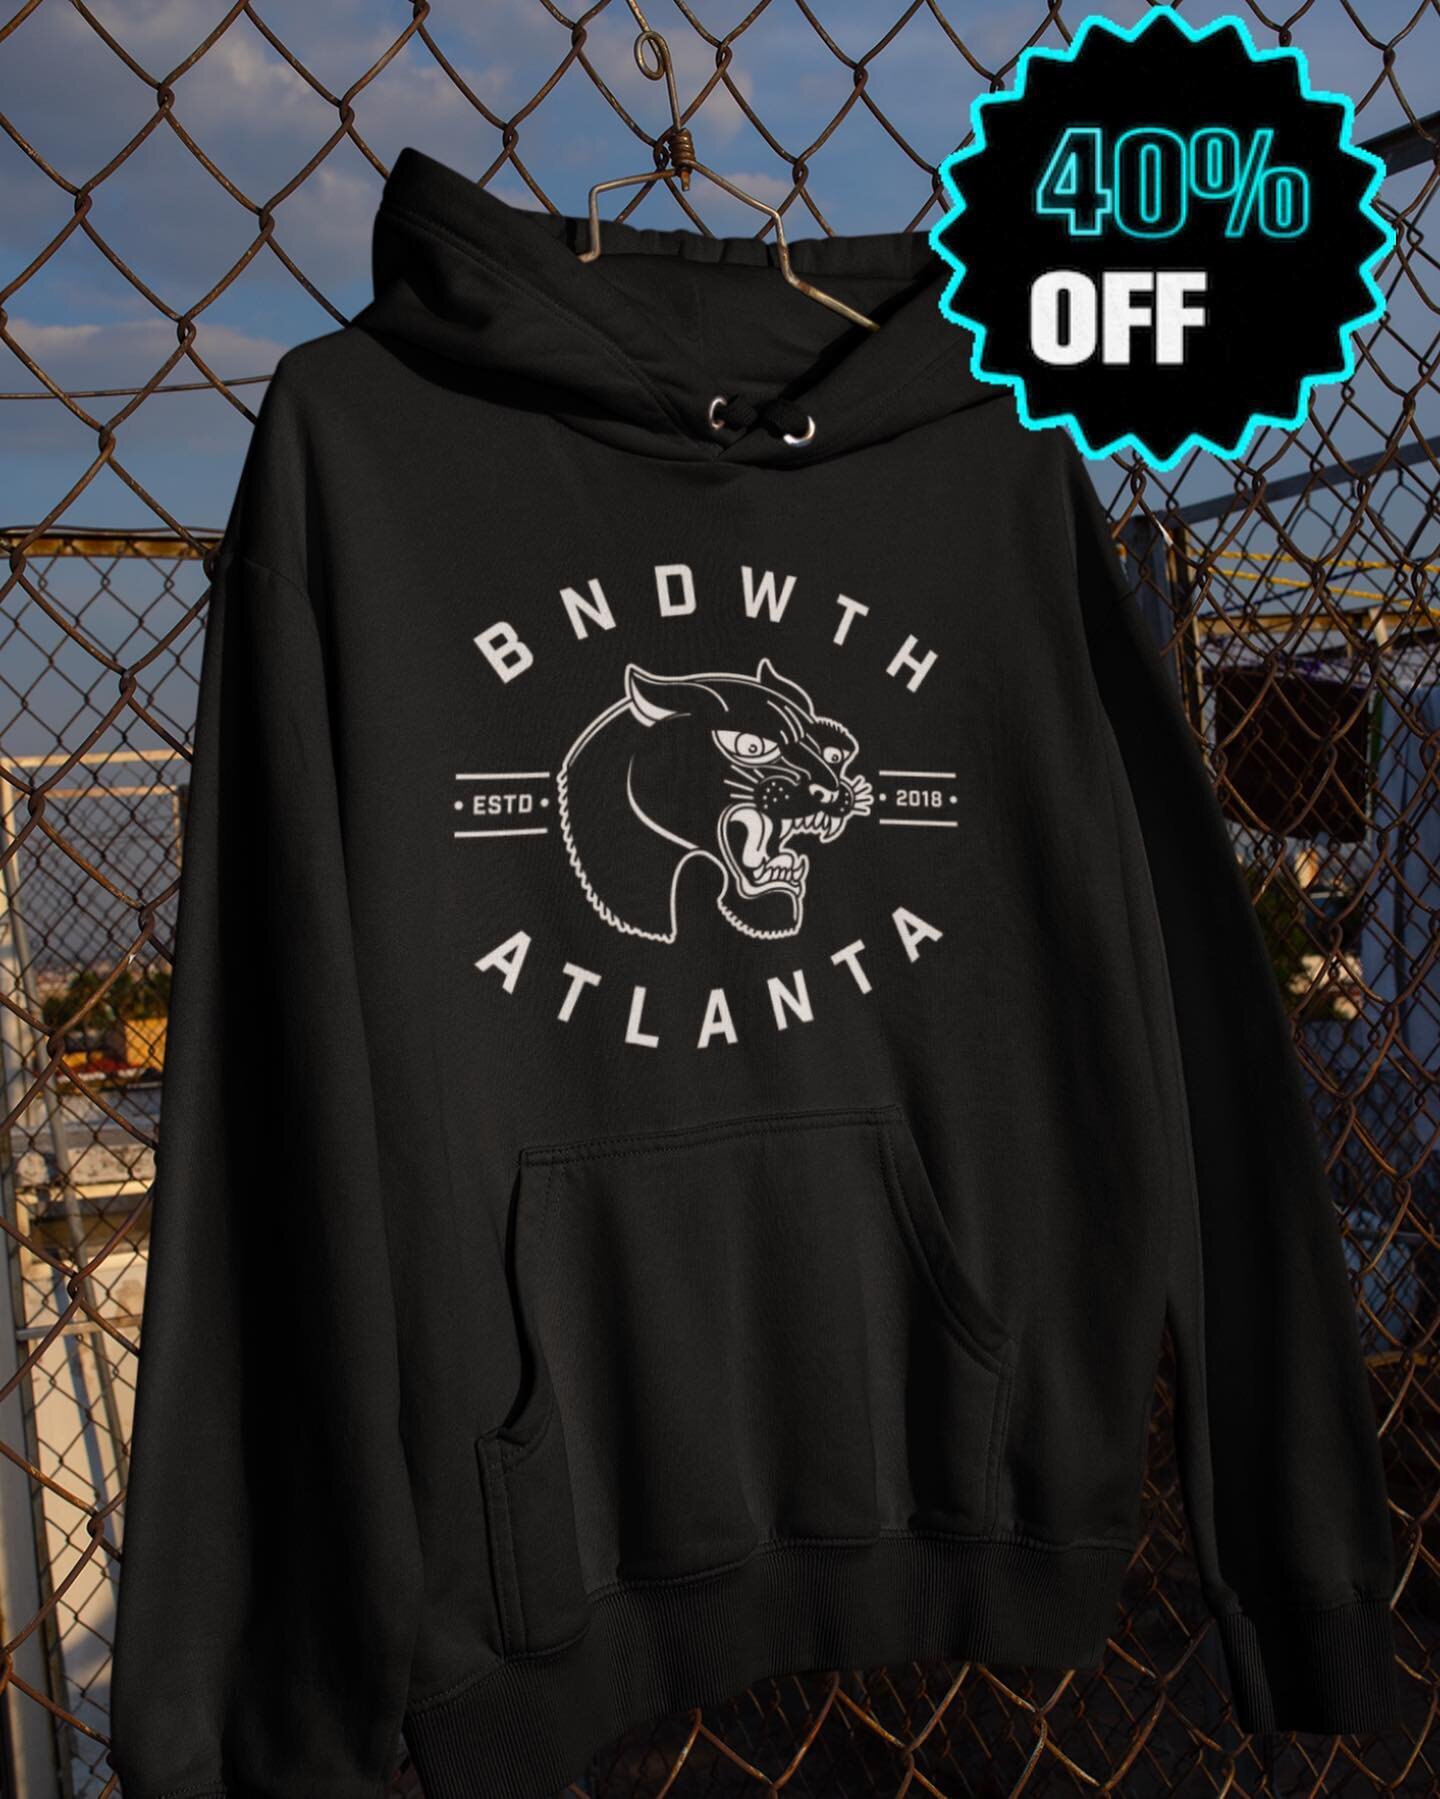 While supplies last all hoodies are 40% off! Link in our bio. BNDWTH.STORE